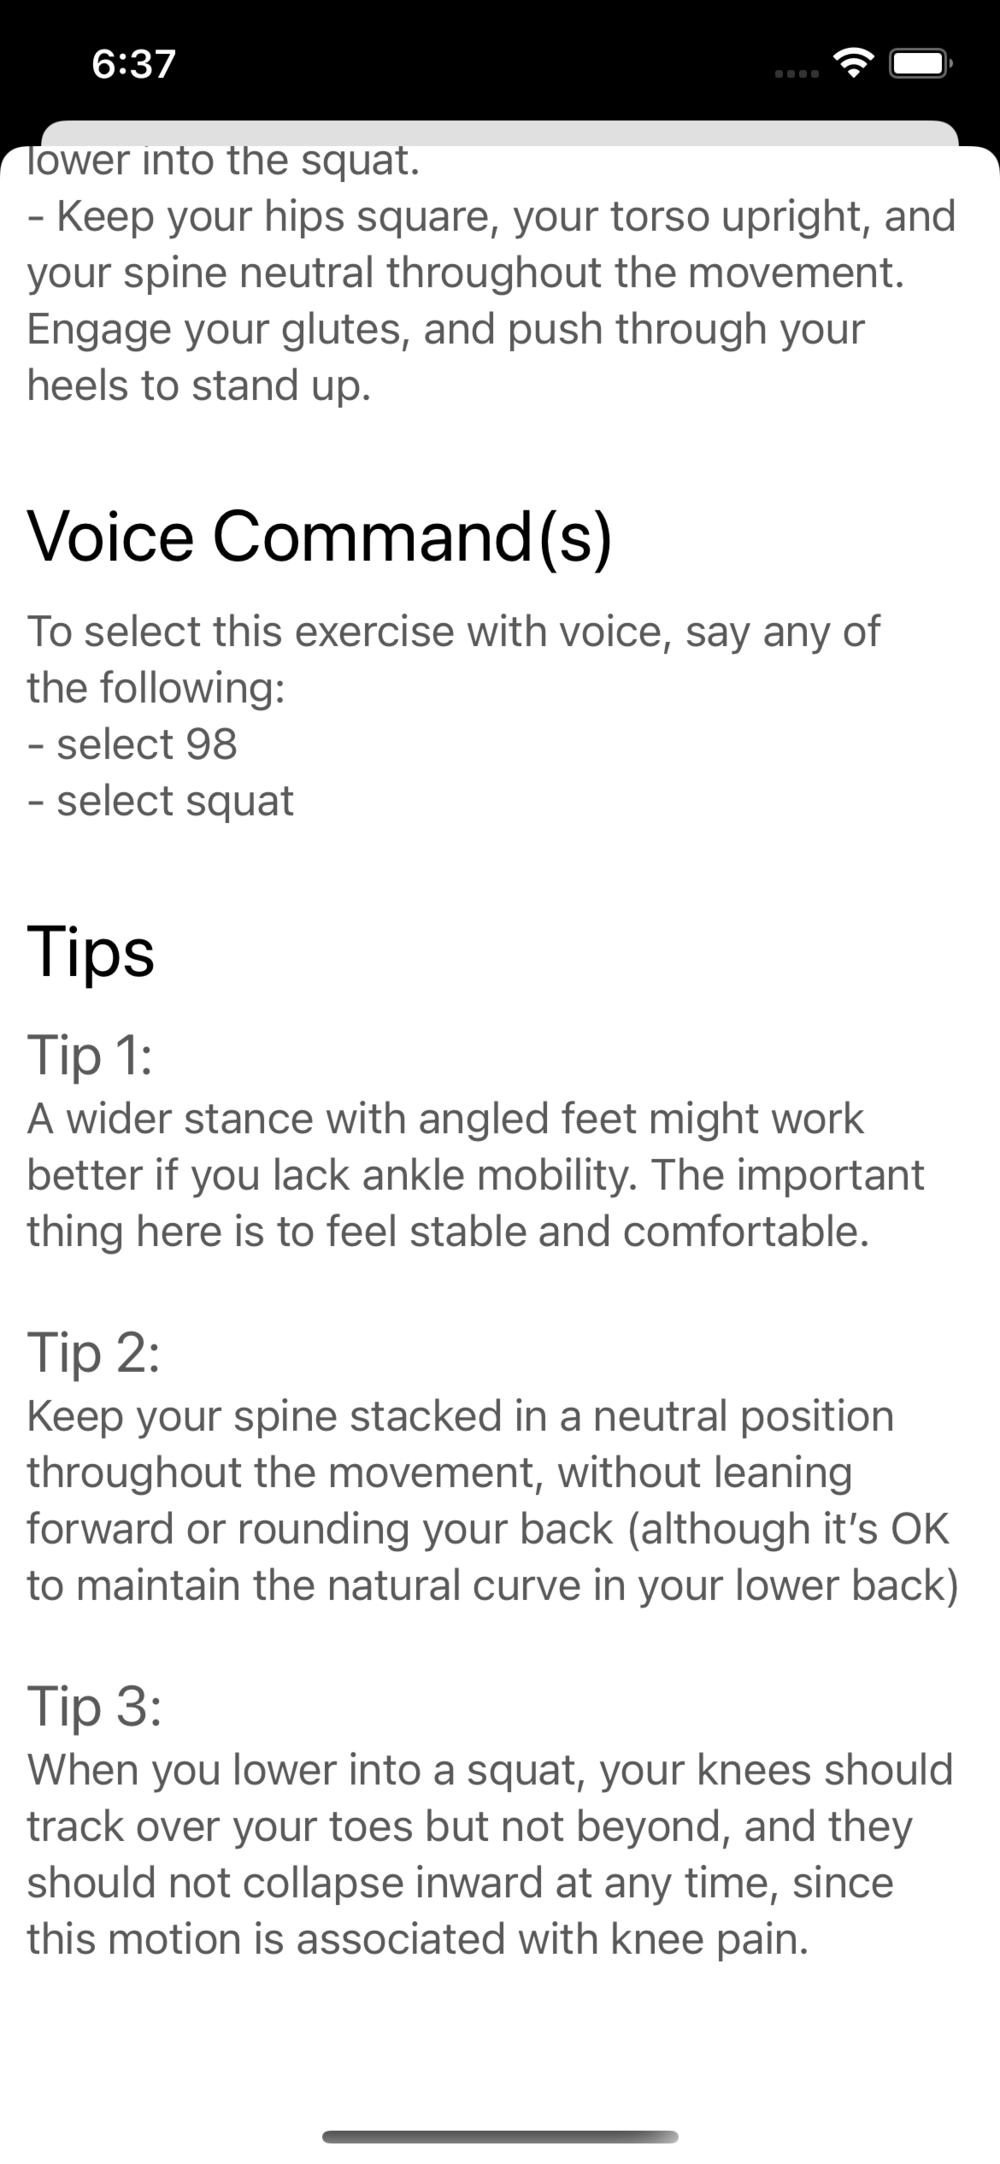 Additional information on what to watch our when doing the exercise (tips) and the actual voice command to select the exercise for tracking